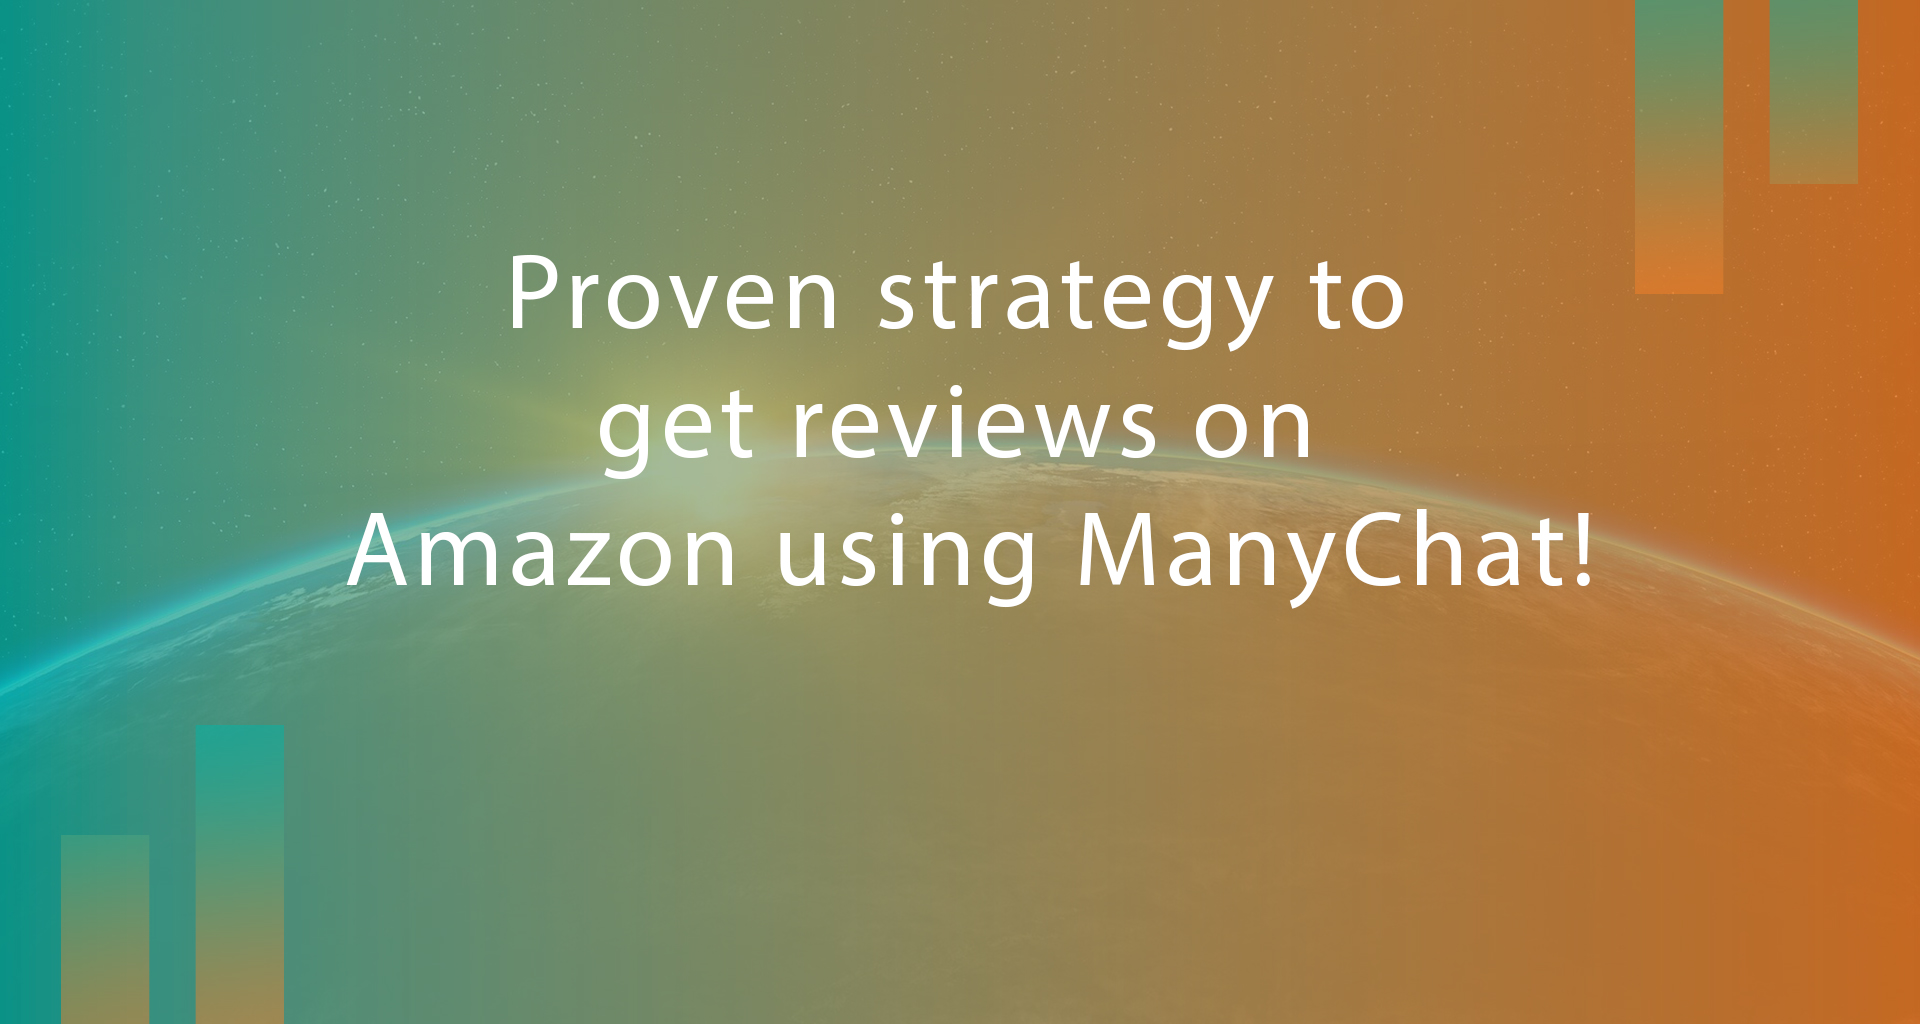 Proven strategy to get reviews on Amazon using ManyChat!